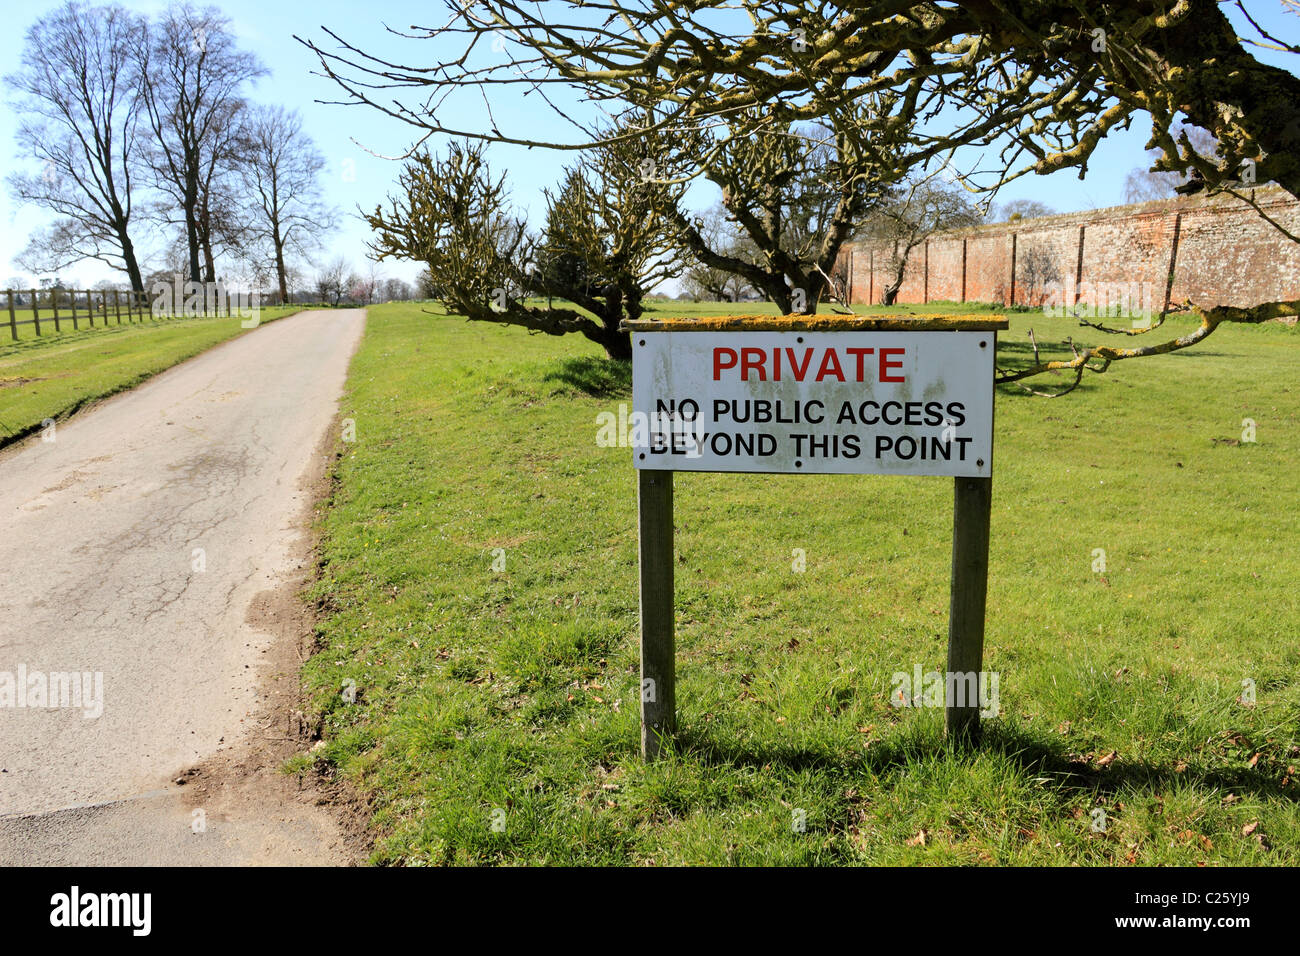 Private no public access beyond this point road sign, Surrey England UK Stock Photo